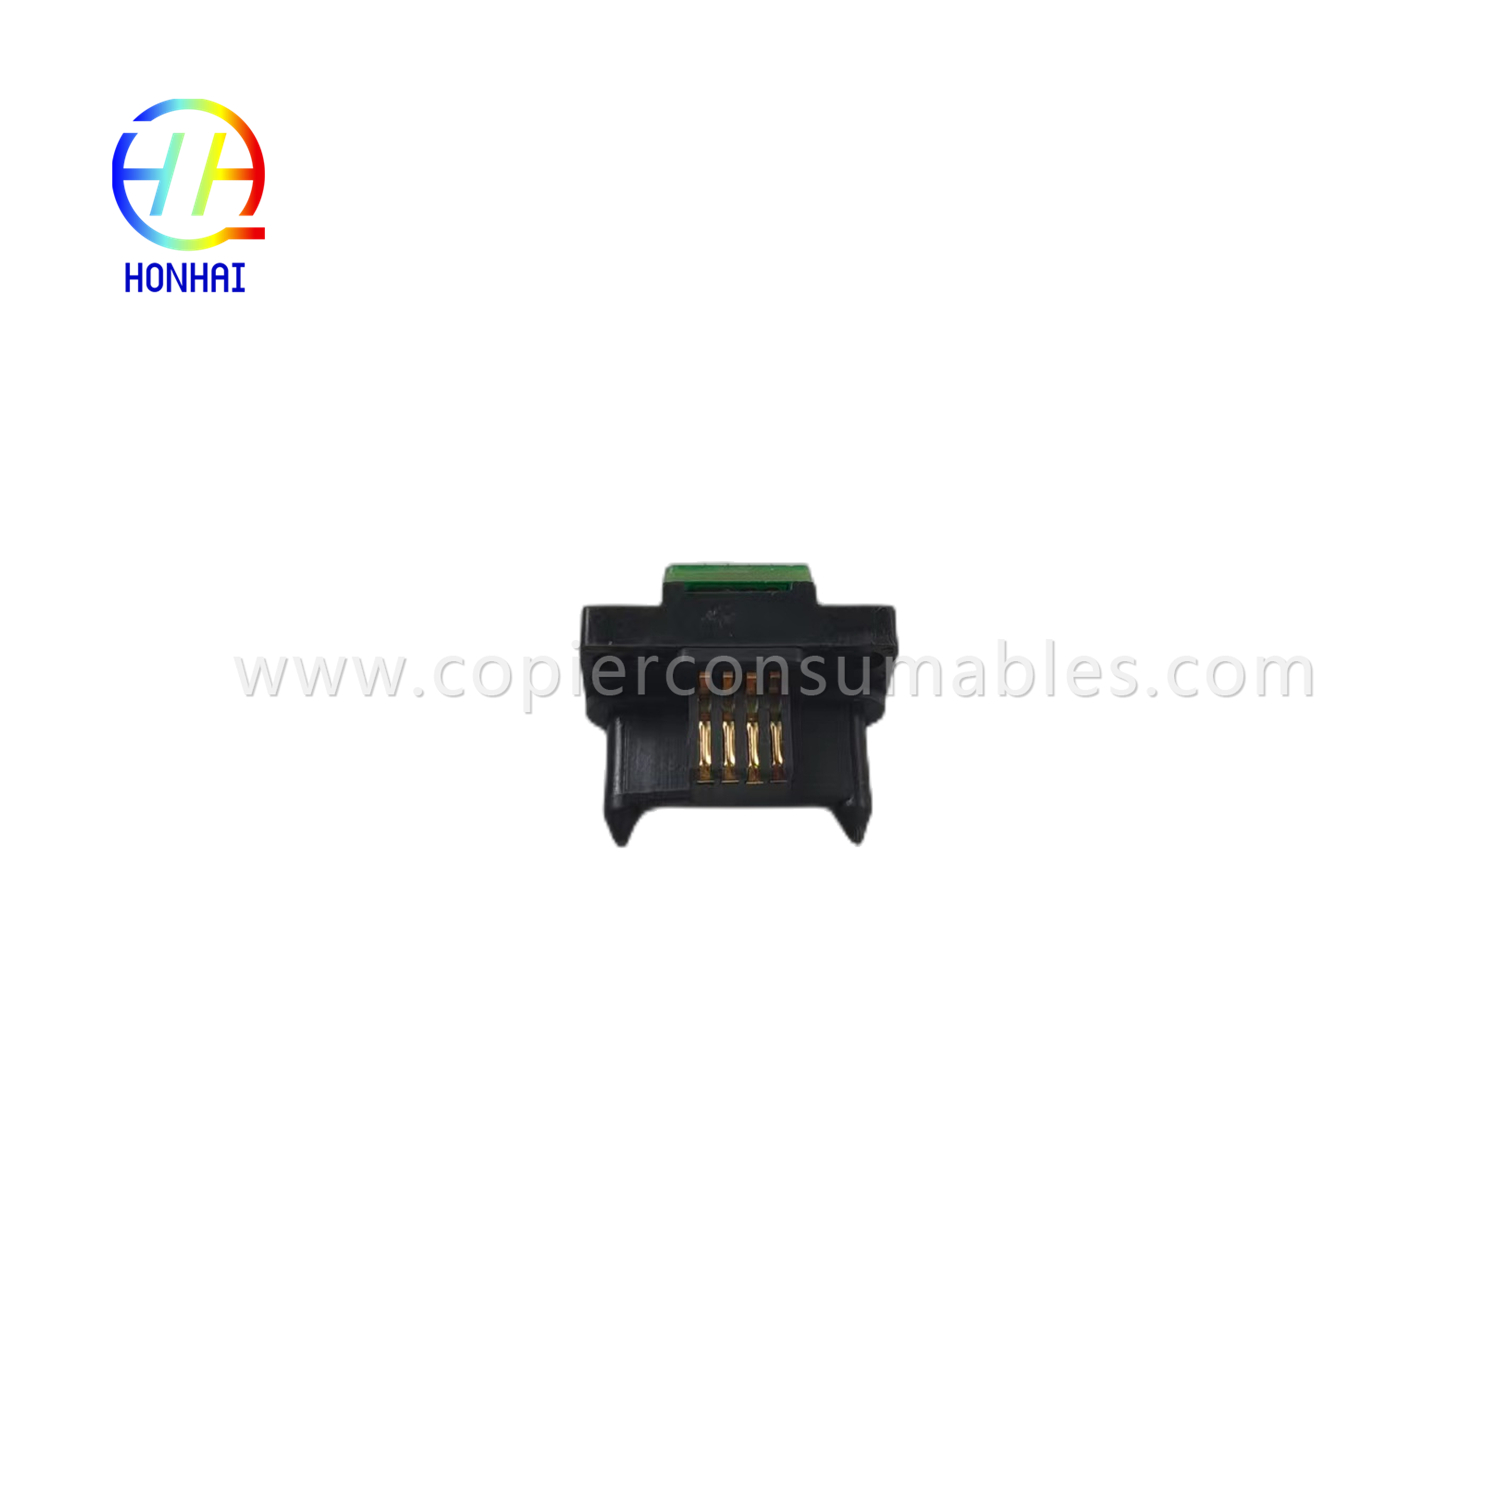 Drum Chip for Xerox 113R00673 113R673 Workcentre 5755 5875 5865 5845 5855 5875 5890 Chip (3)_副本